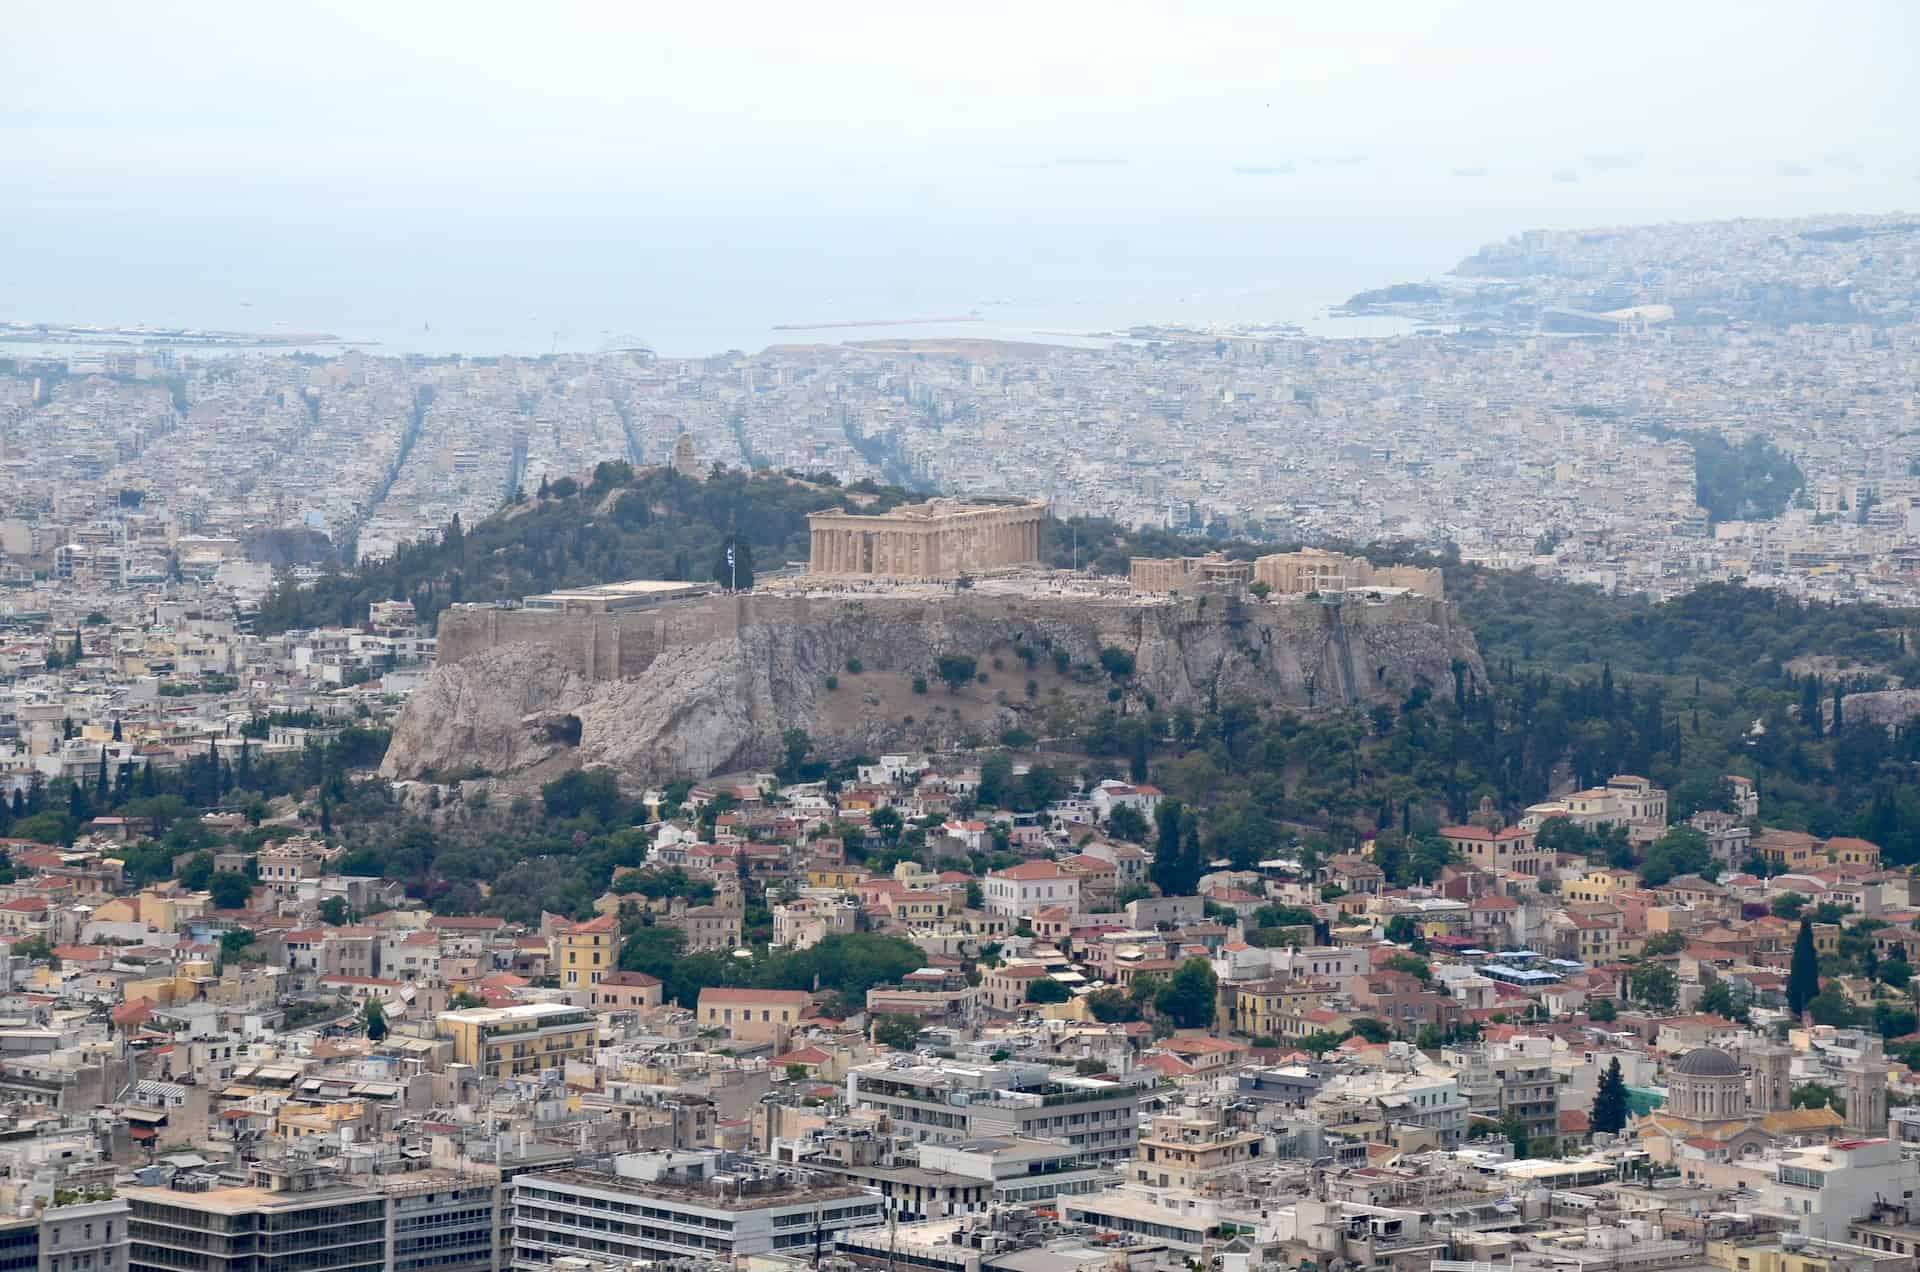 Acropolis from Lycabettus Hill in Athens, Greece